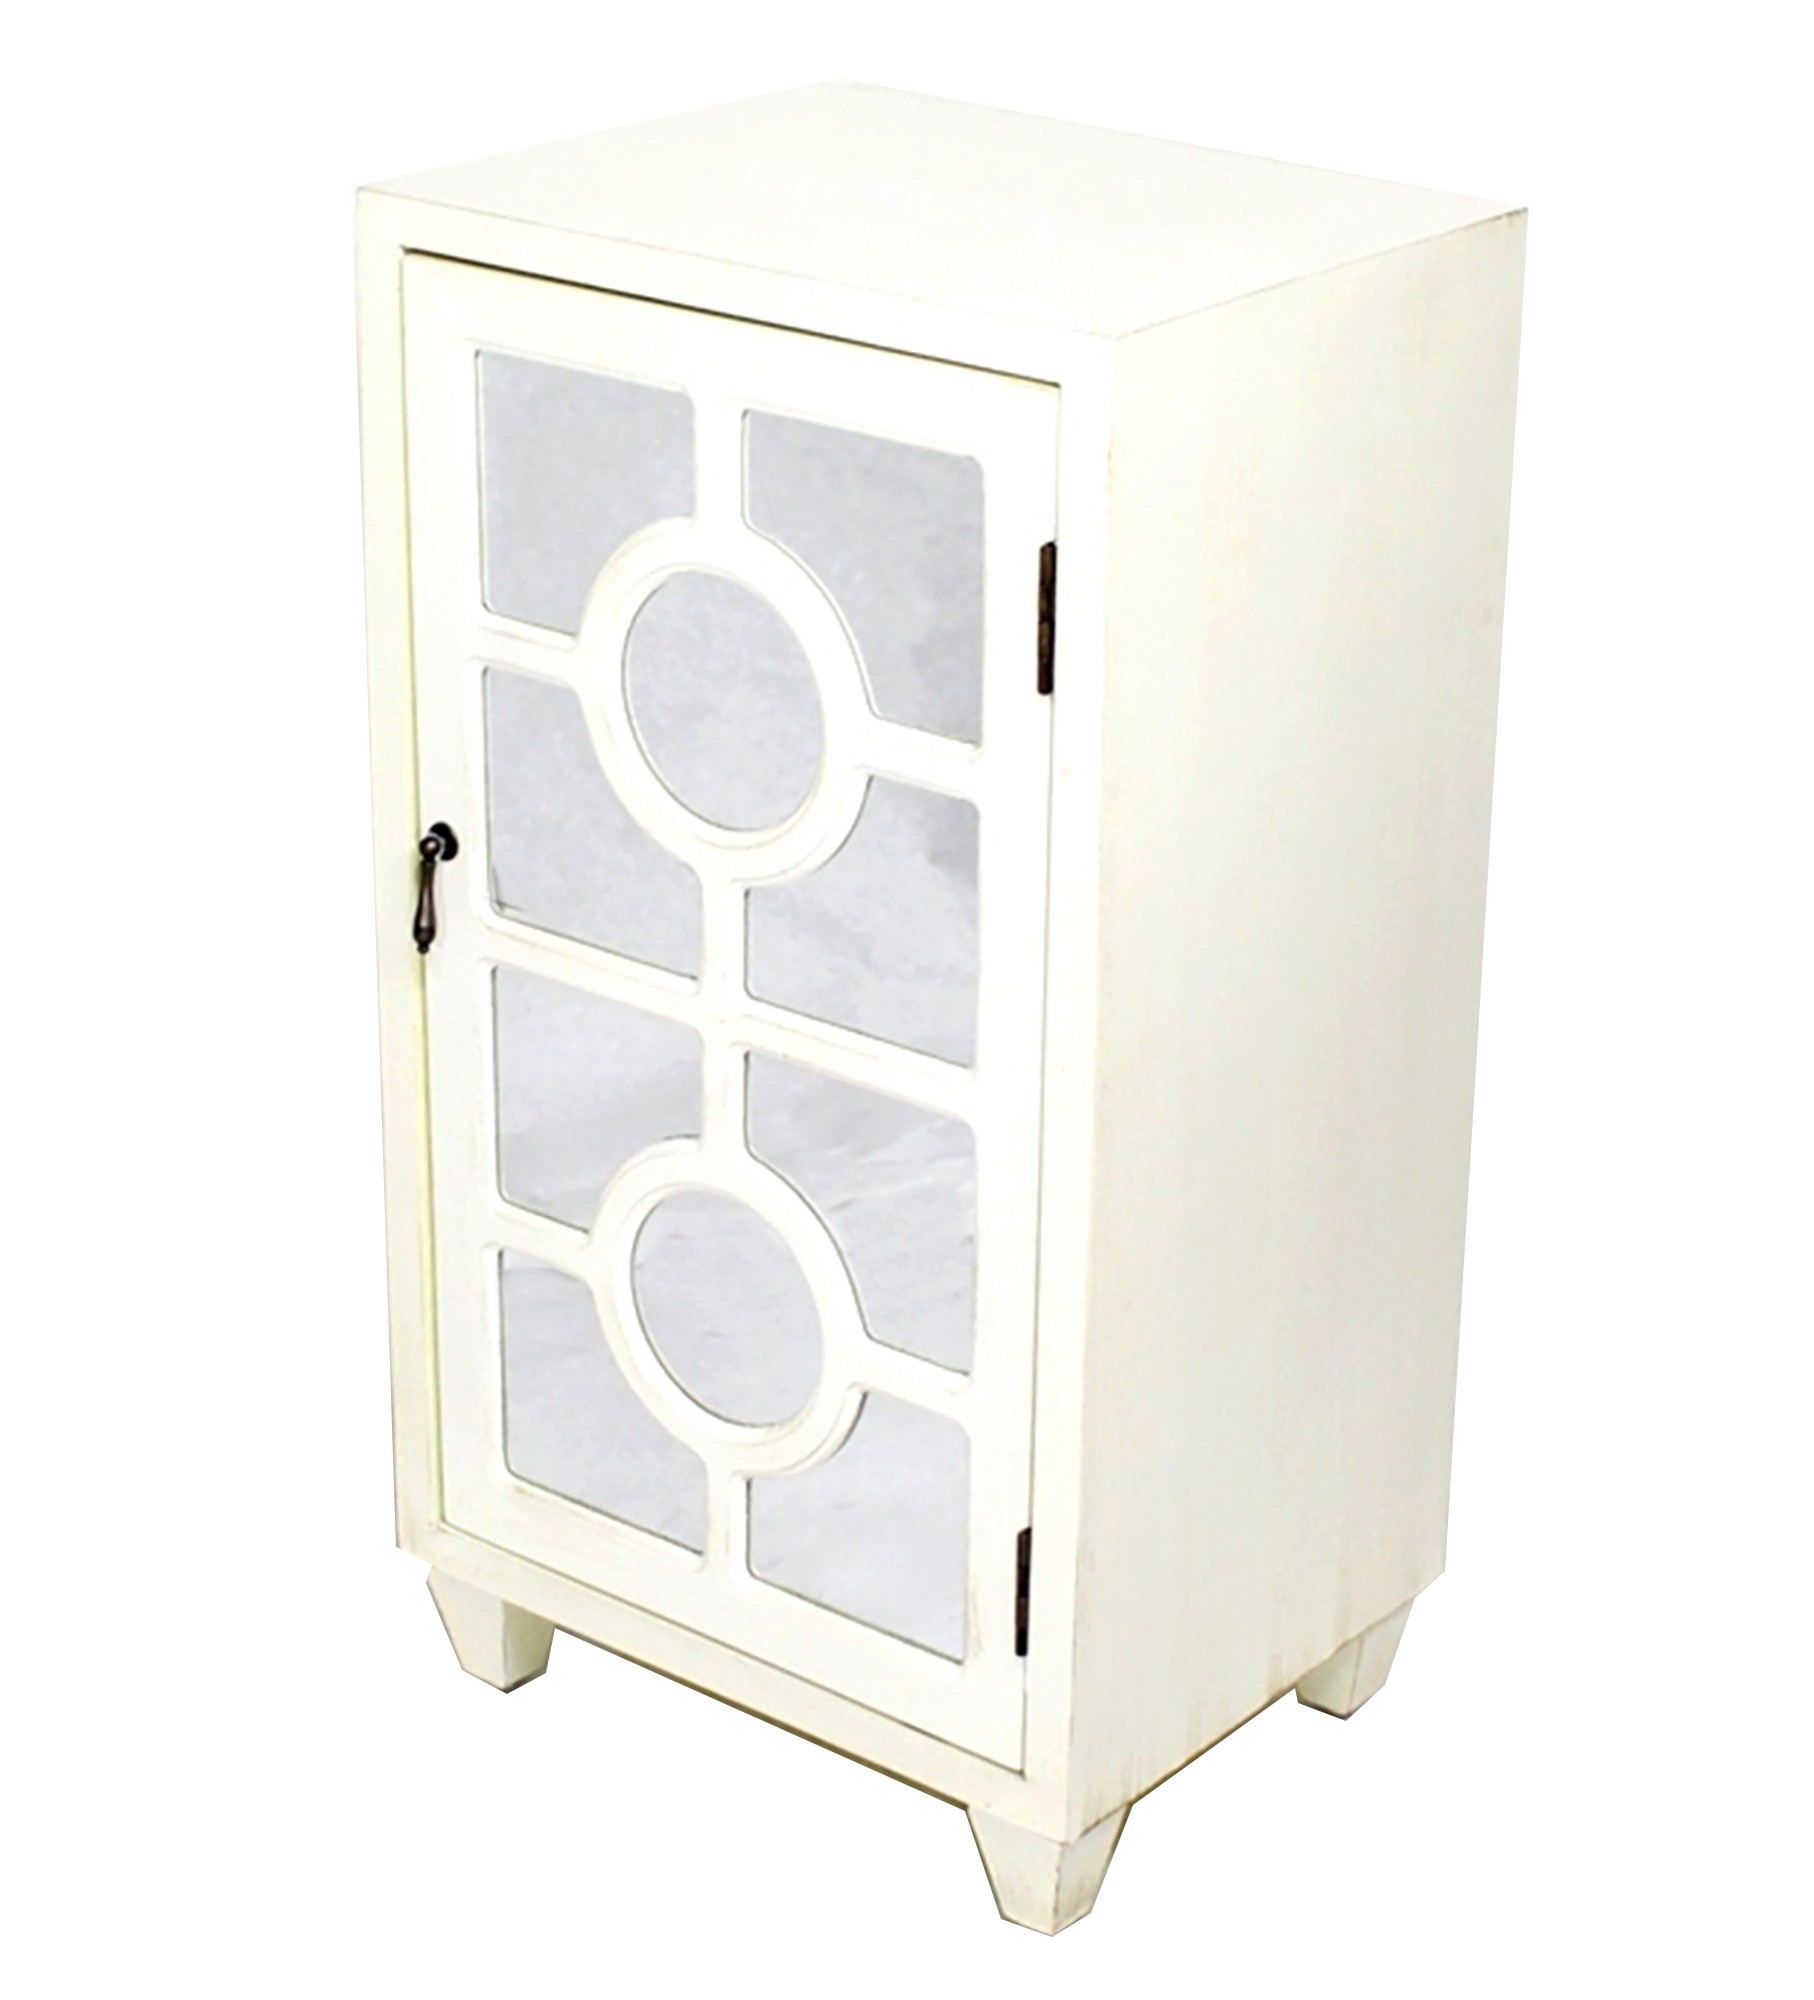 16.75" X 12.6" X 31" Antique White MDF Wood Mirrored Glass Accent Cabinet with a Door and Lattice Inserts